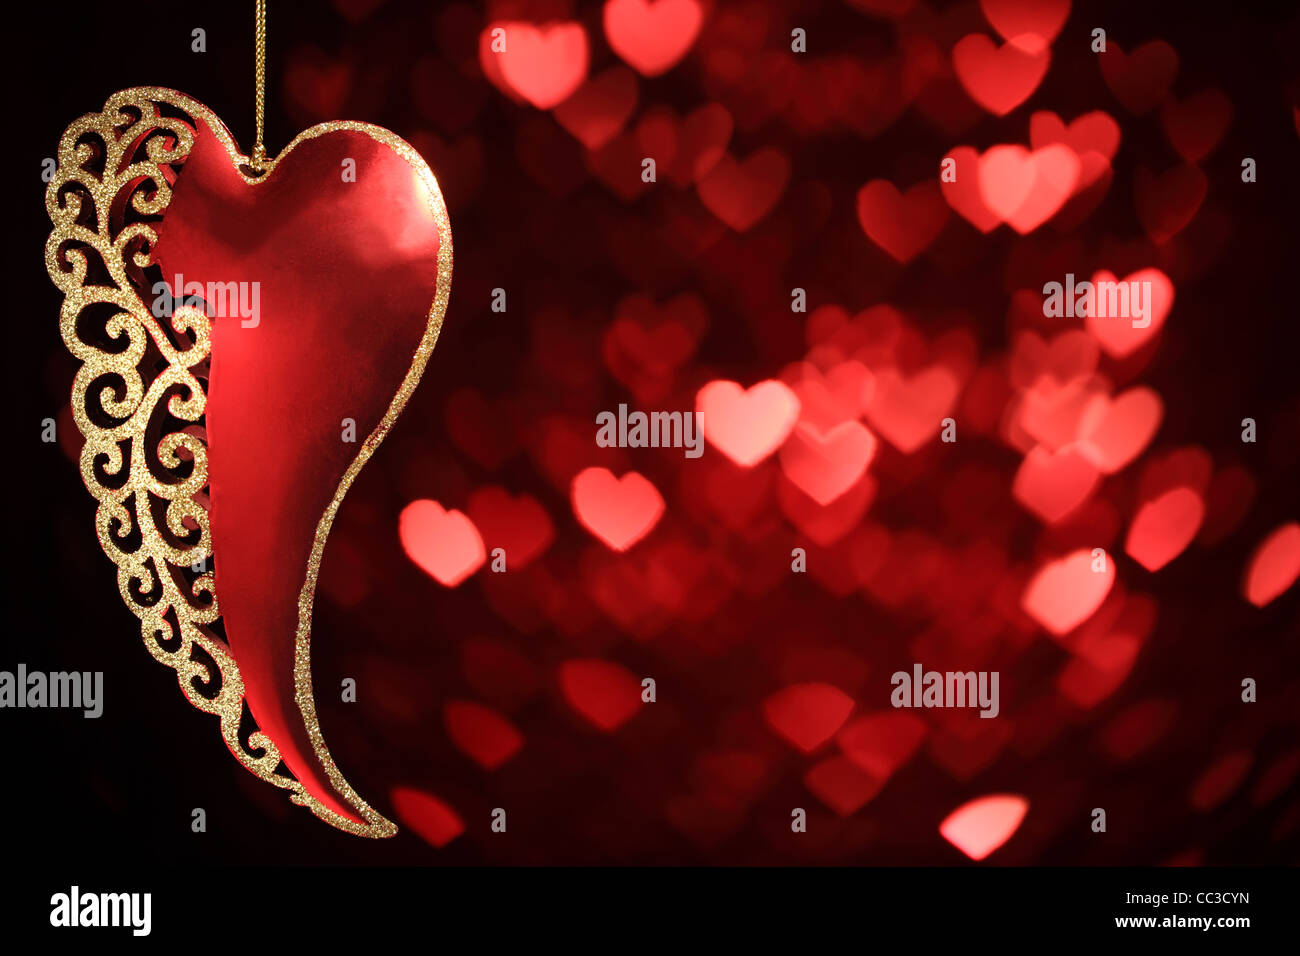 Heart shaped ornament hanging on defocused bokeh background Stock Photo